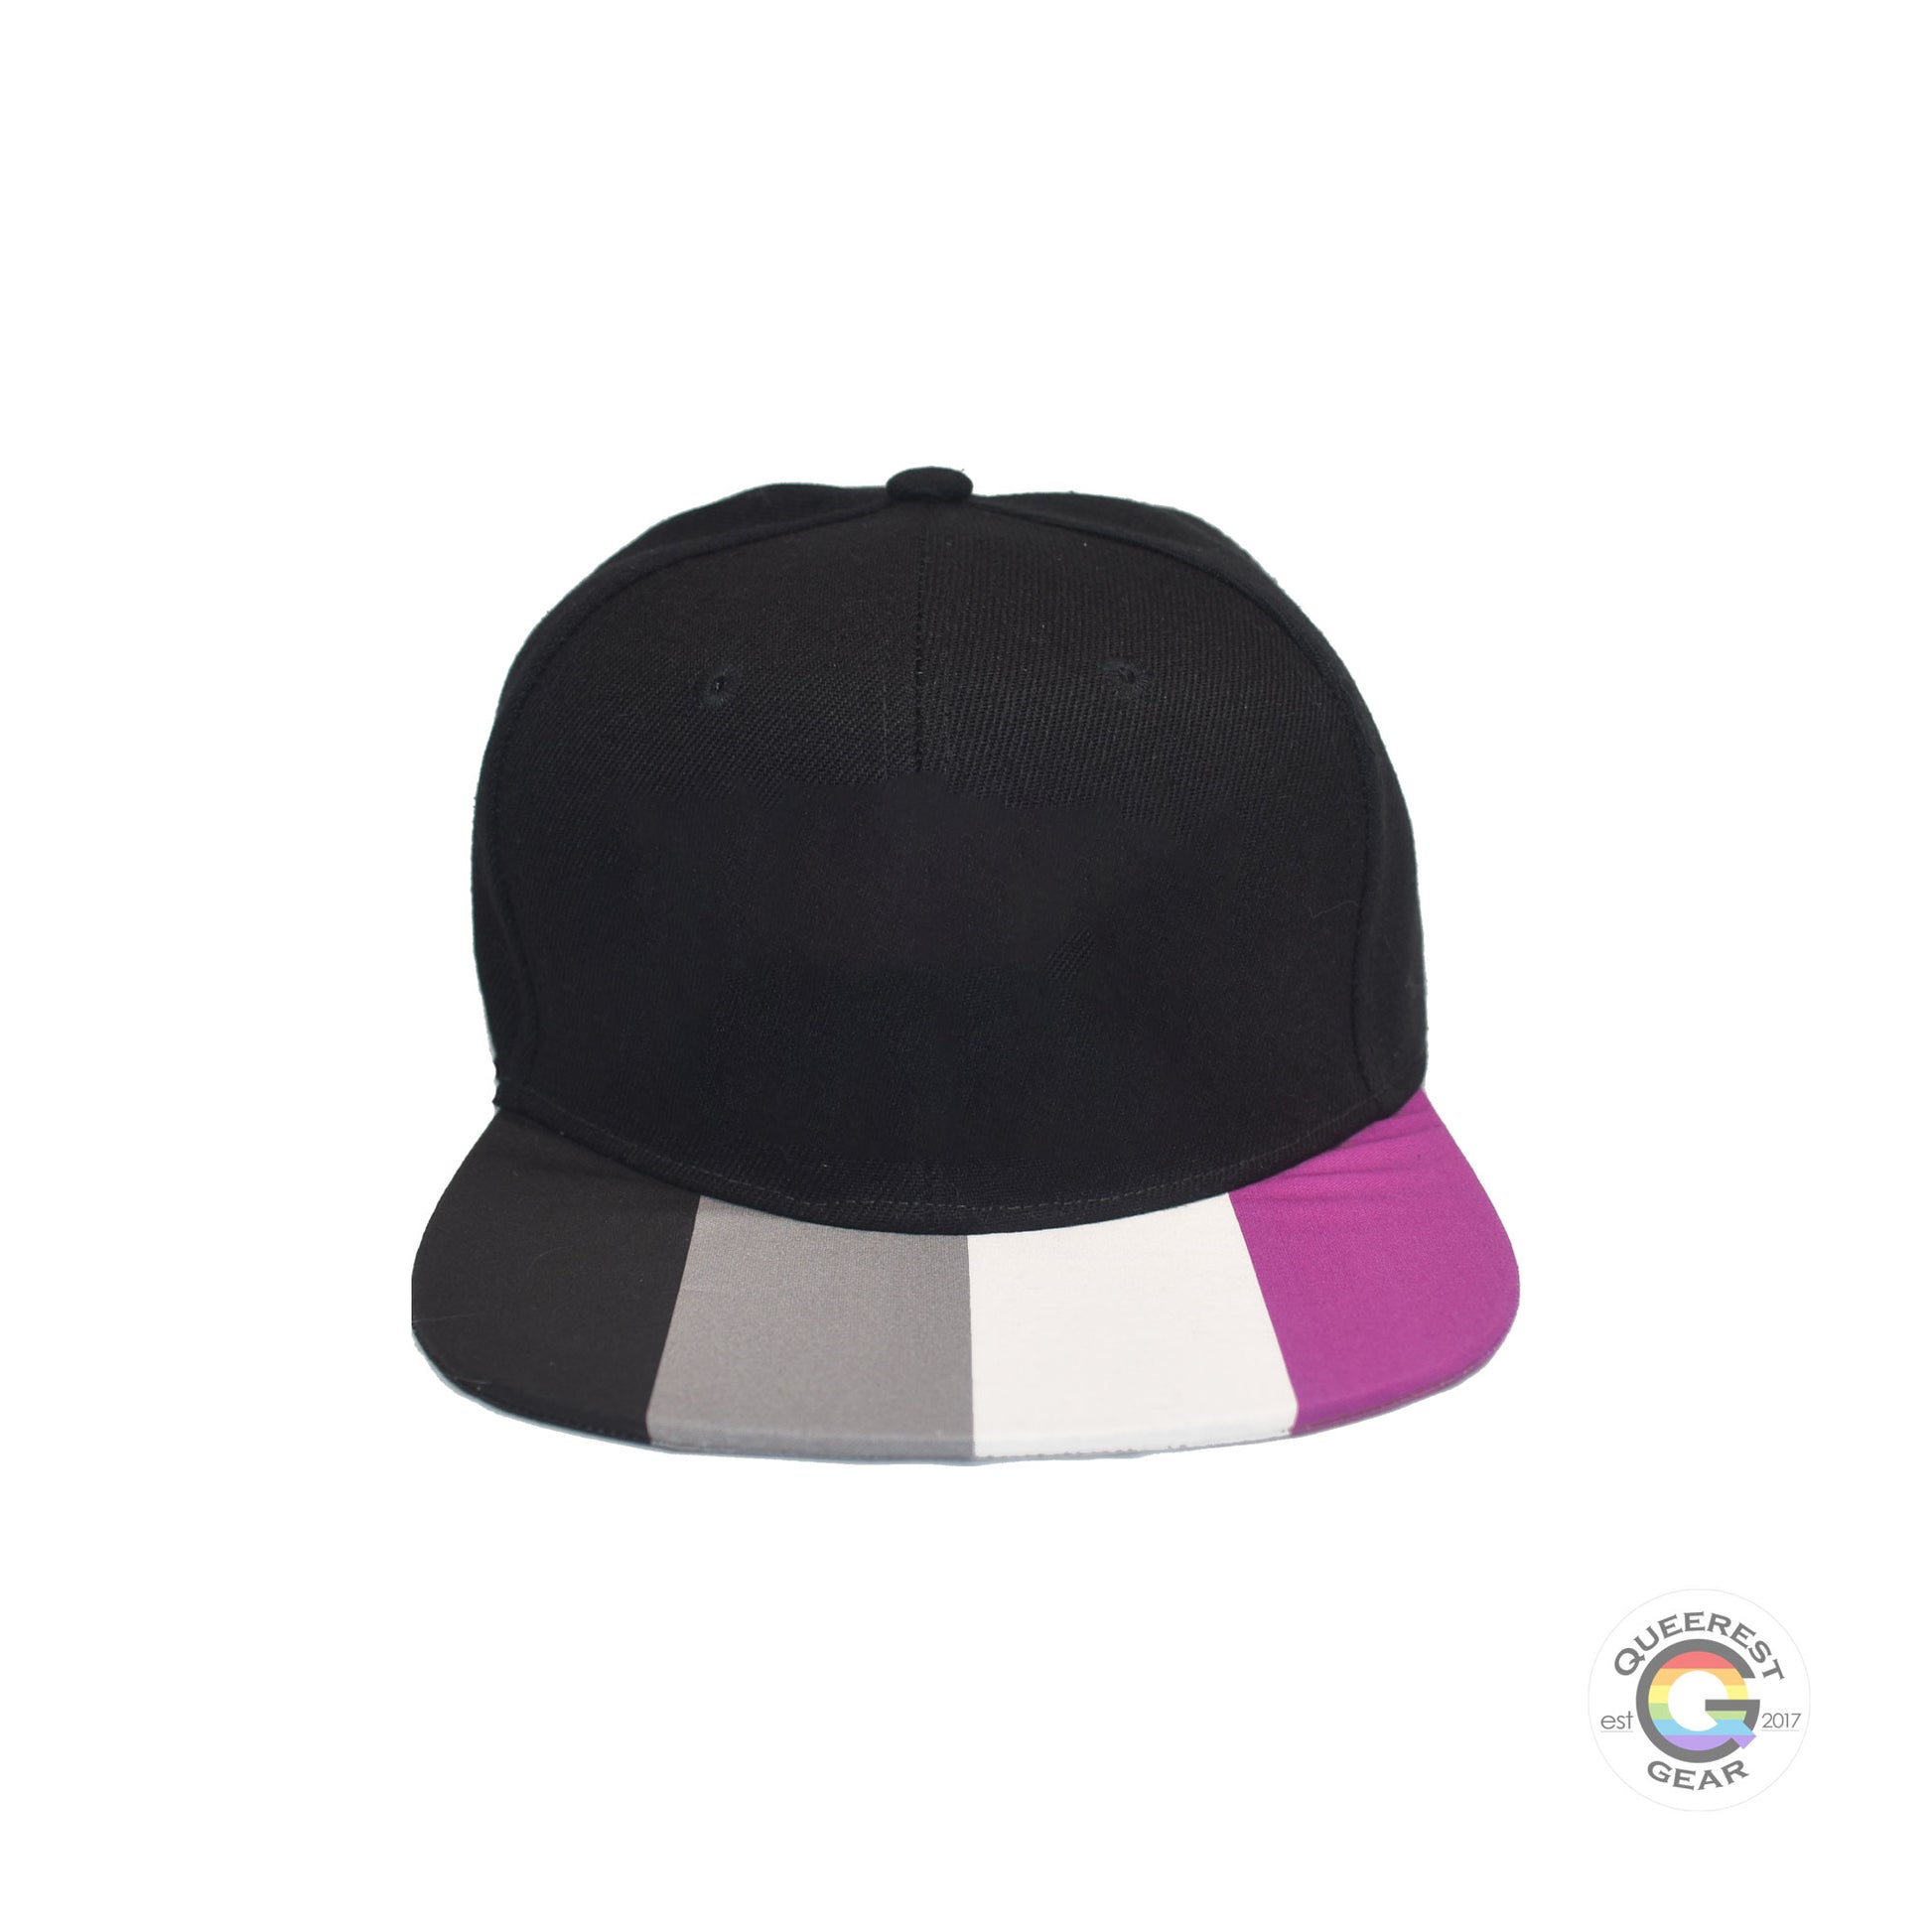 Black flat bill snapback hat. The brim has the asexual pride flag on both sides. Front view